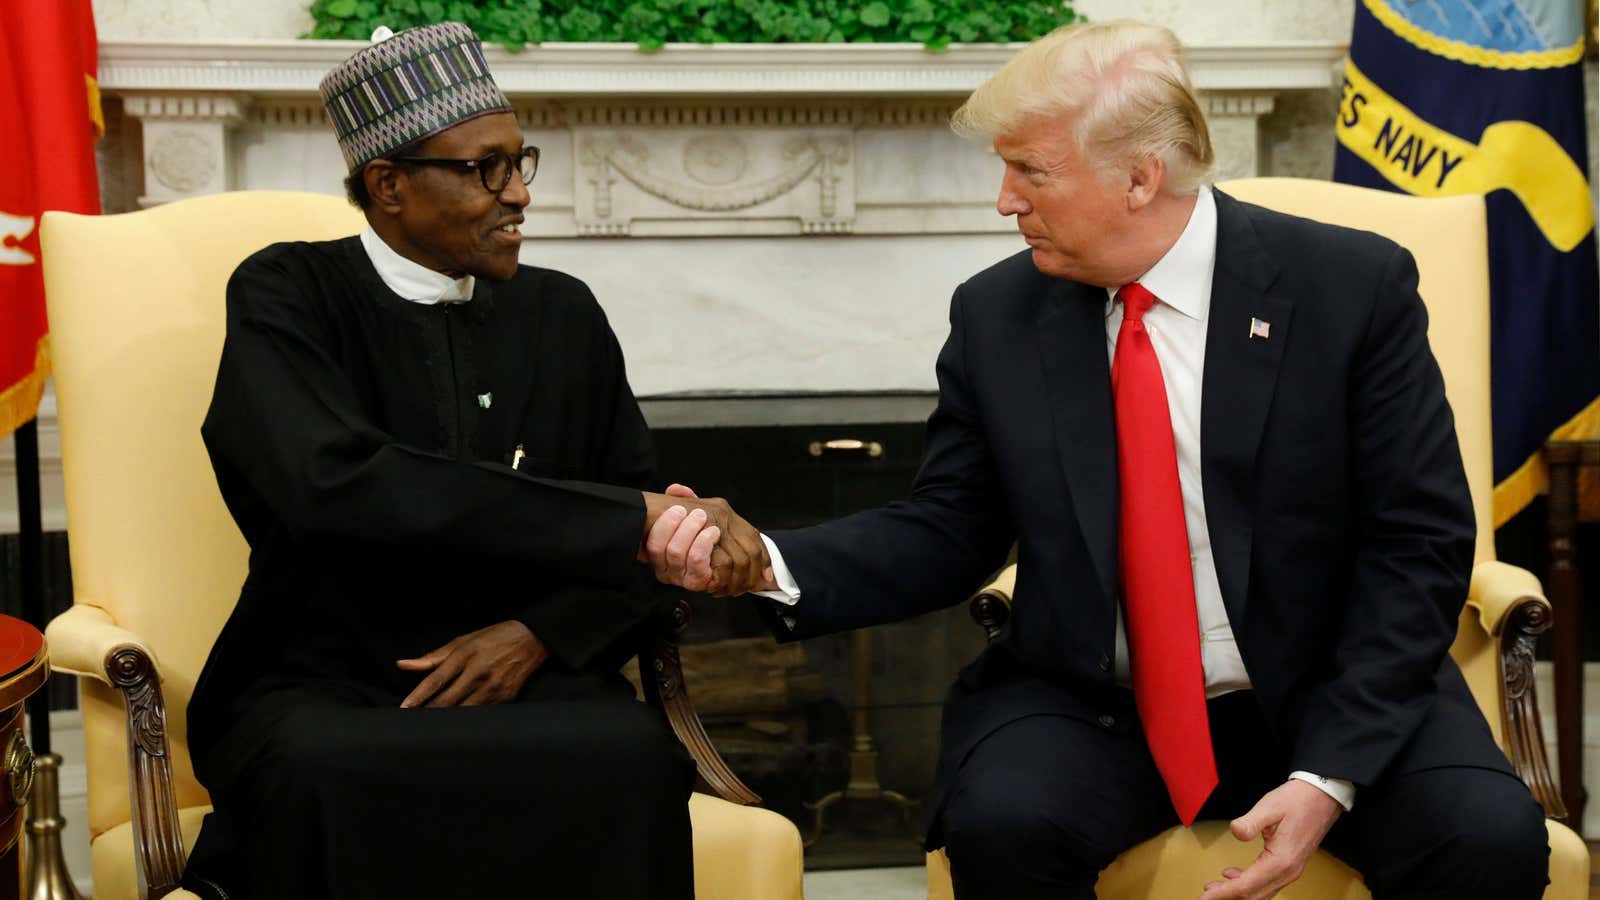 US President Donald Trump meets with Nigeria’s President Muhammadu Buhari in the Oval Office of the White House in 2018